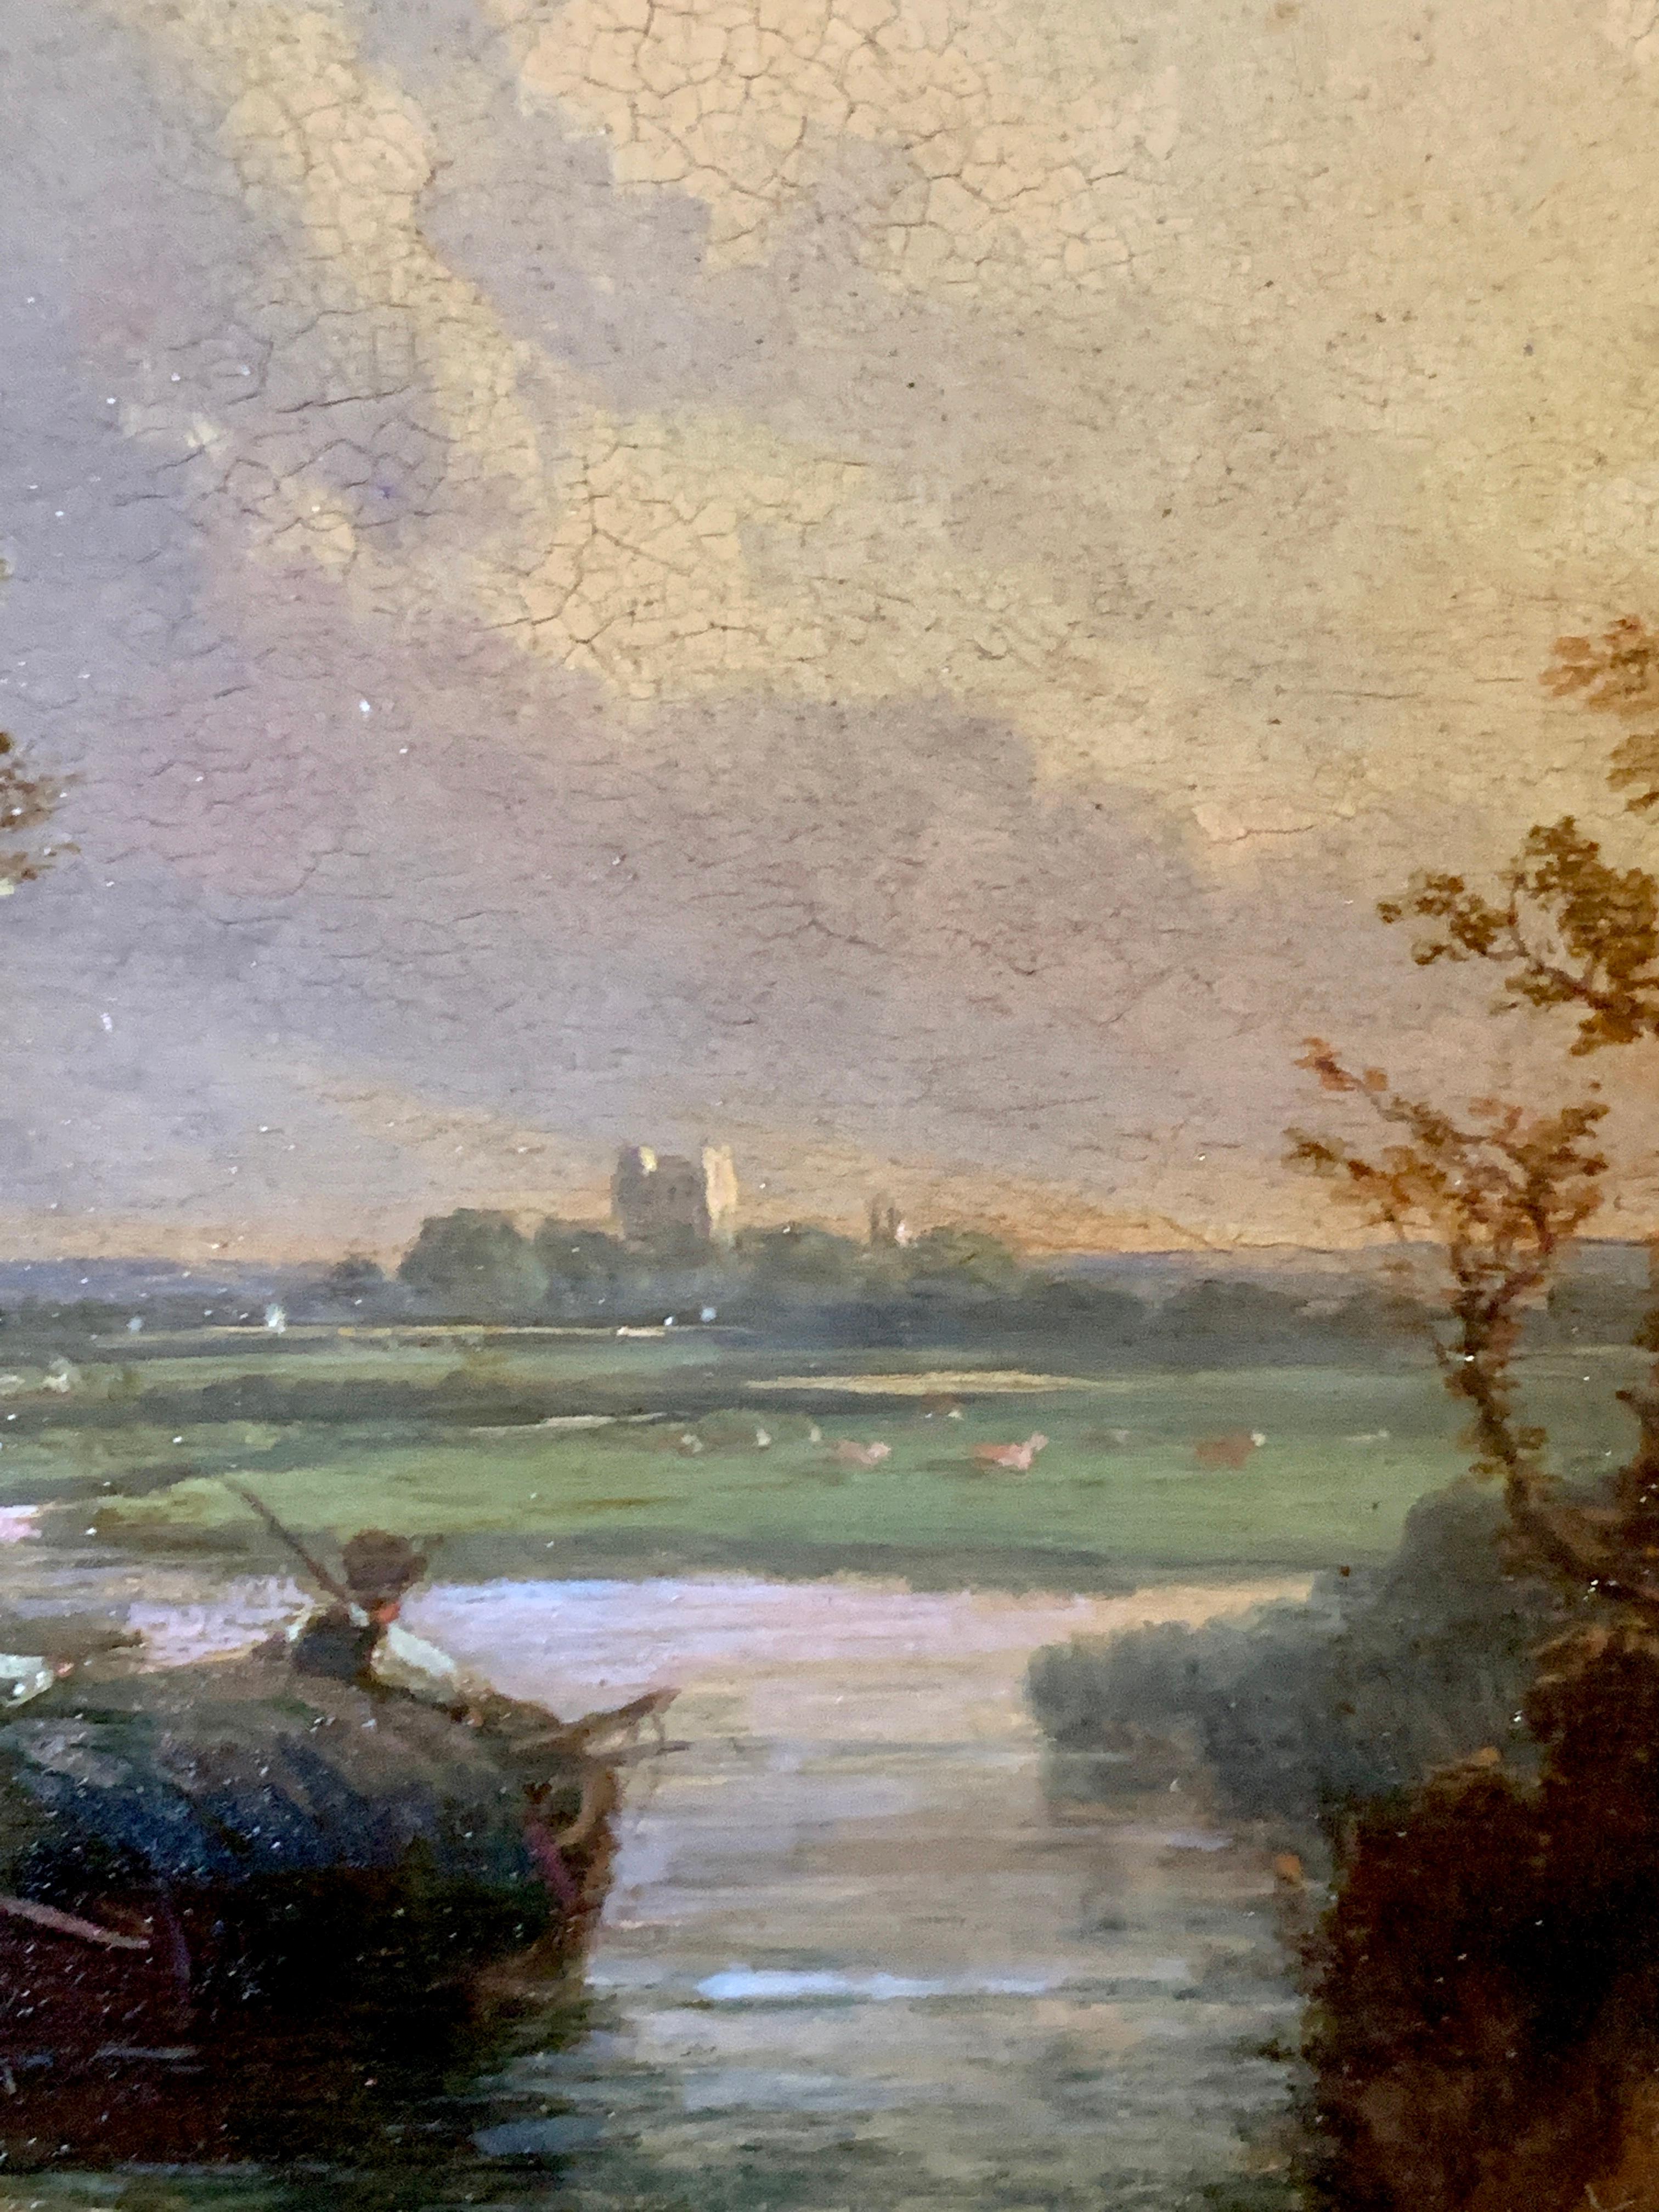 Pair of 19th century English River landscapes with men fishing at sunrise and sunset.

Walter was an English landscape painter from the late 19th-century. He mostly painted bucolic English landscapes, often with wonderful settings suns or by the